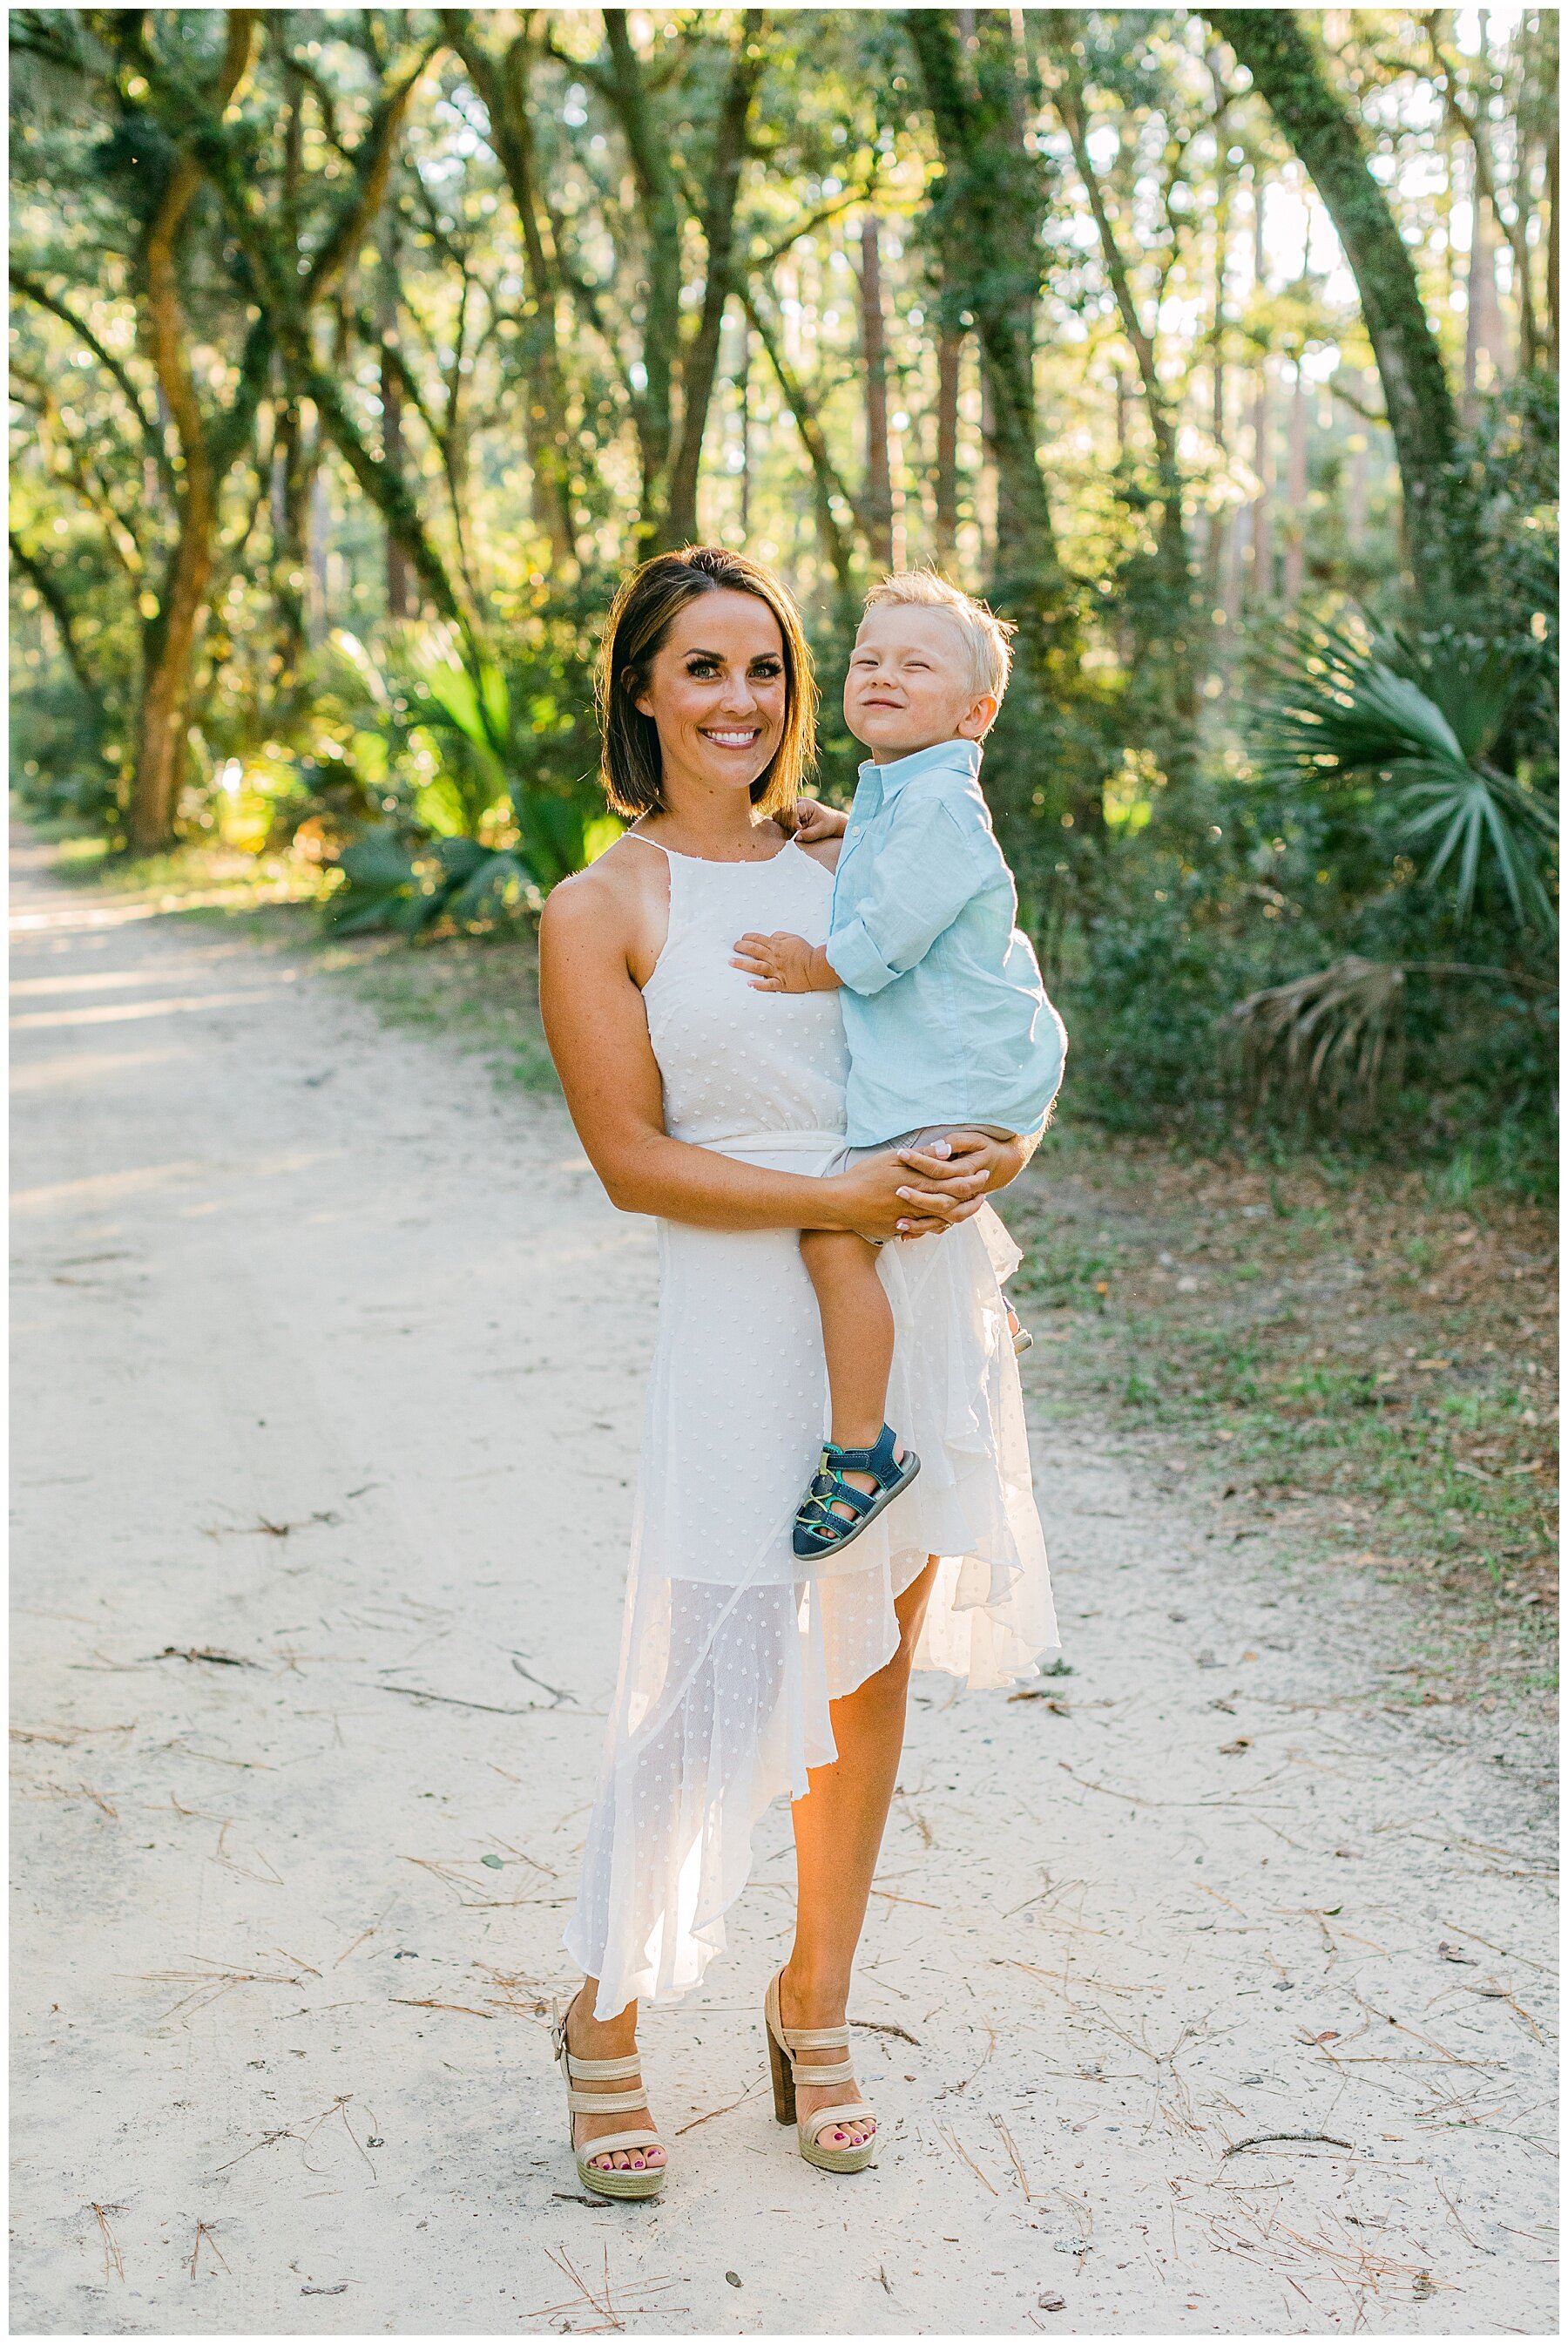 Katherine_Ives_Photography_Mcmillen_Montage_Palmetto_Bluff_19.jpg